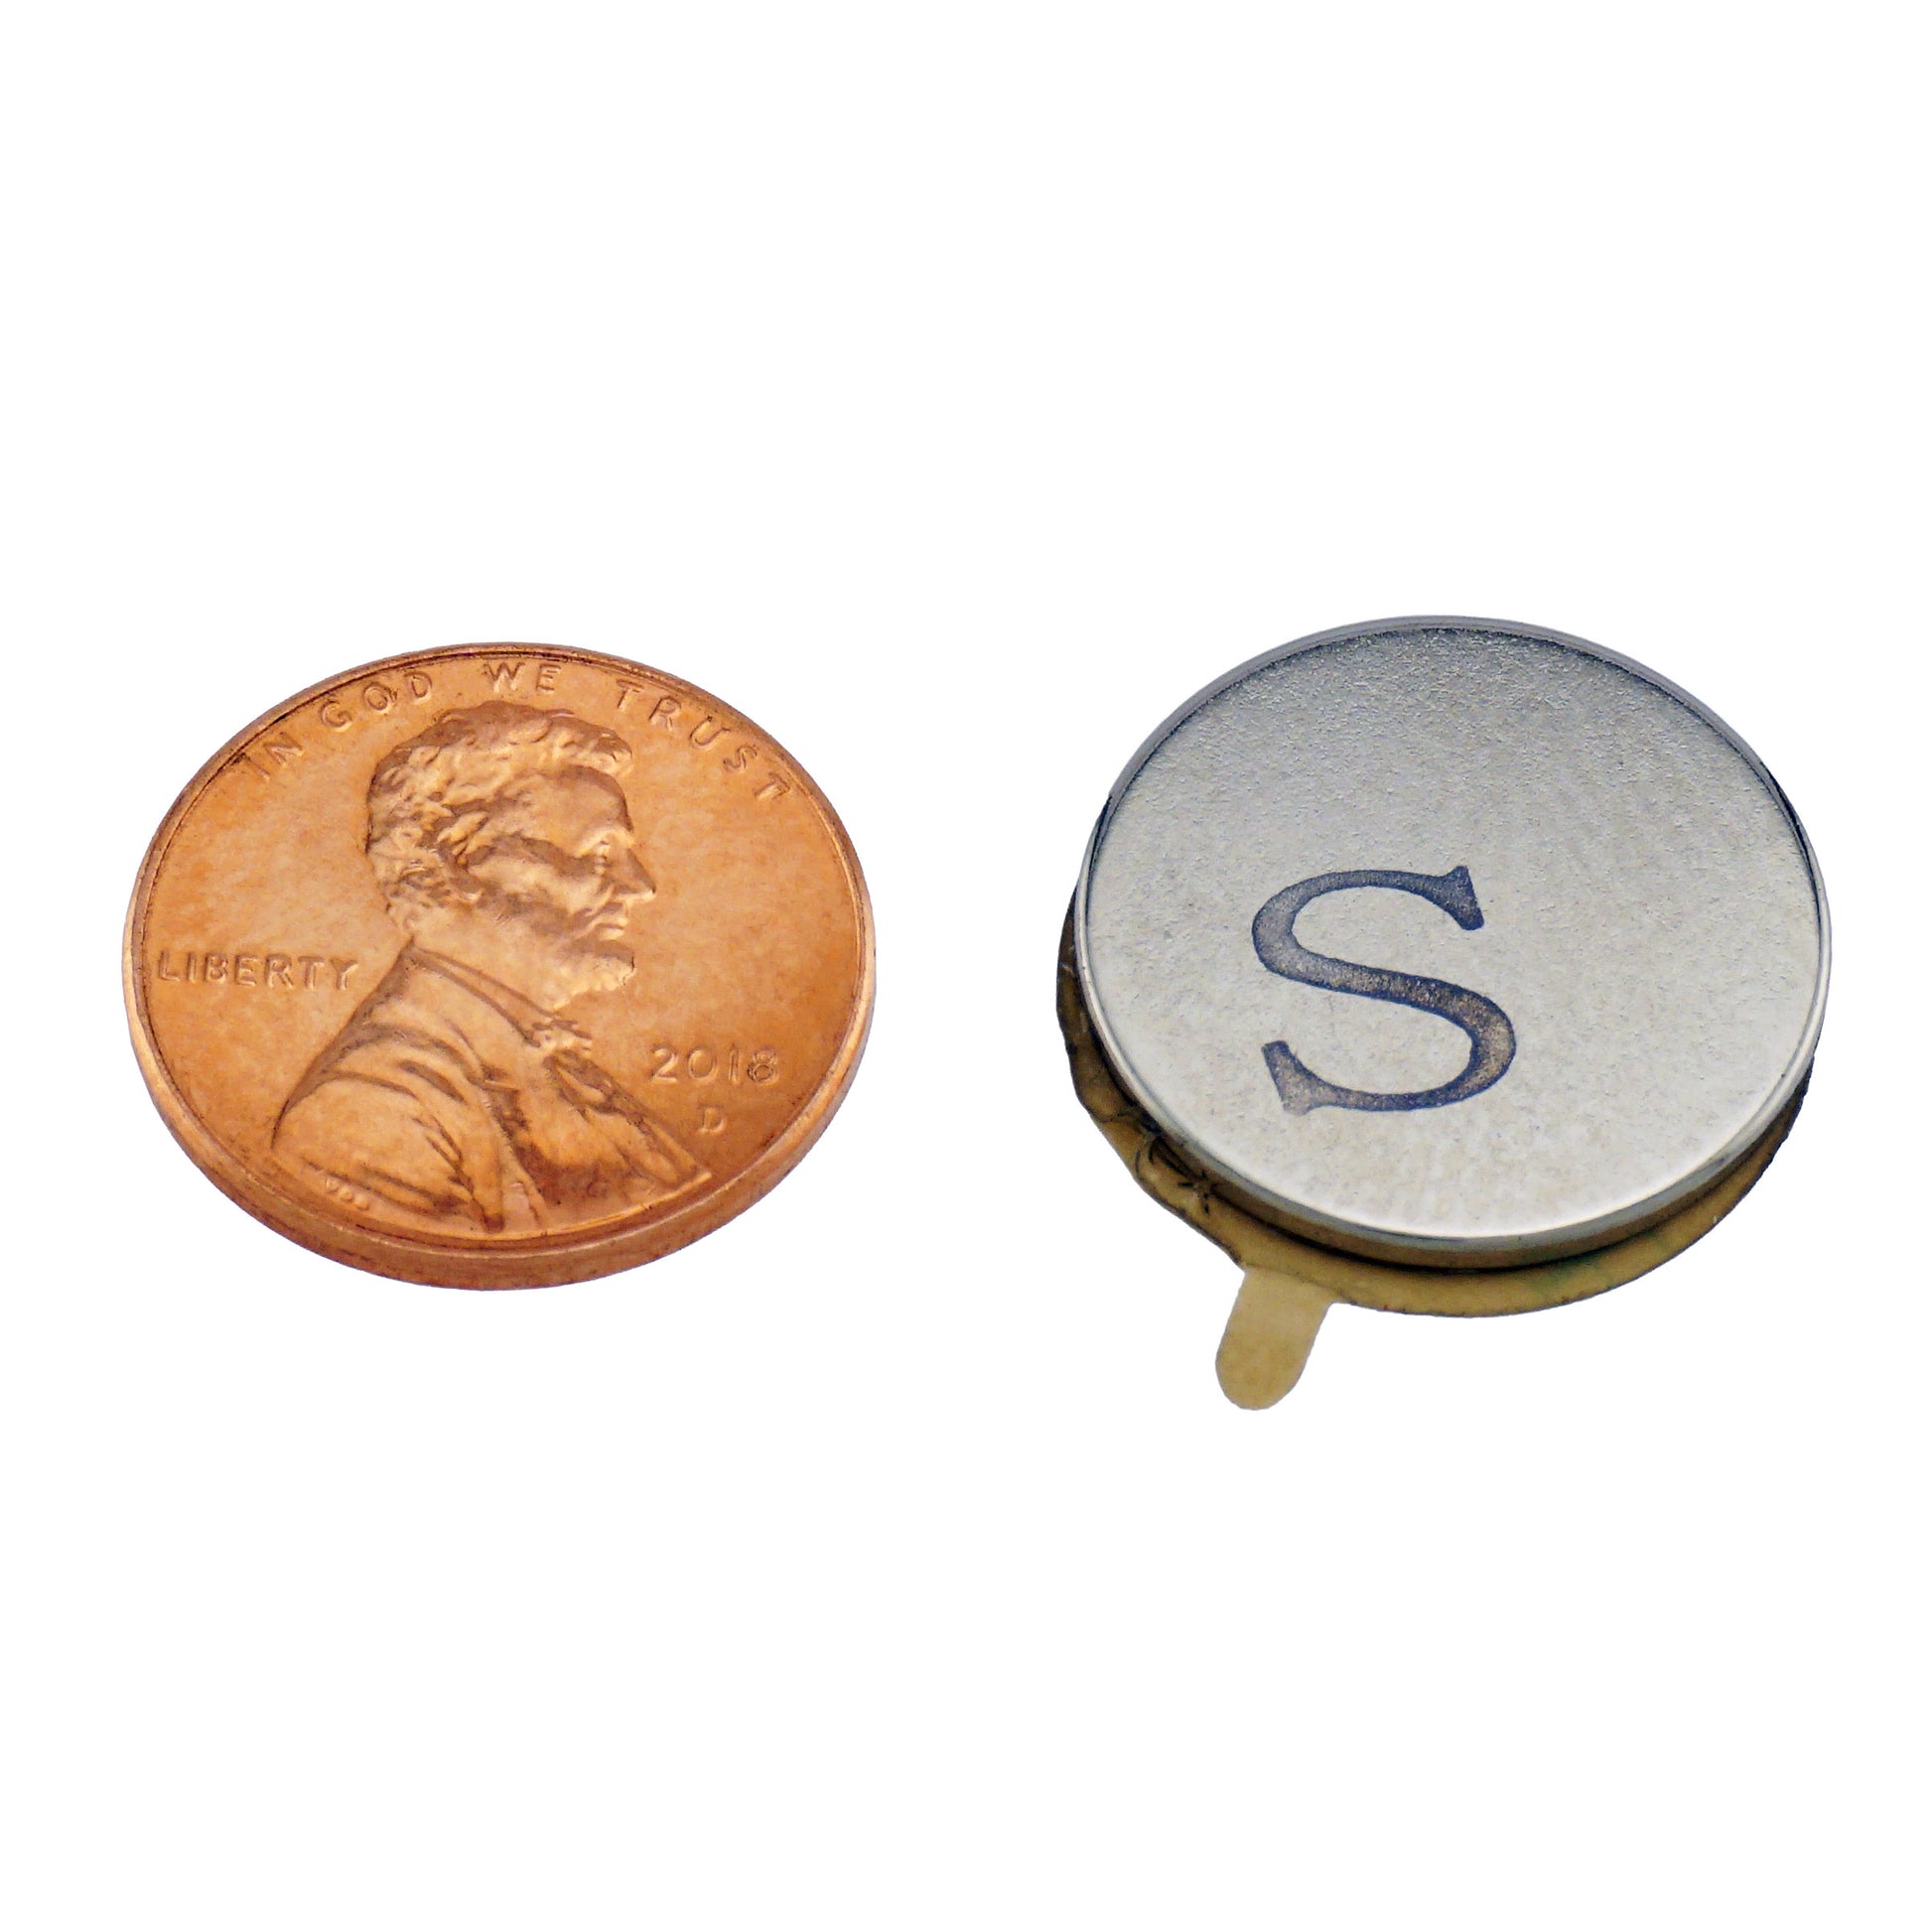 Load image into Gallery viewer, FTND75S Neodymium Disc Magnet with Adhesive - Compared to Penny for Size Reference